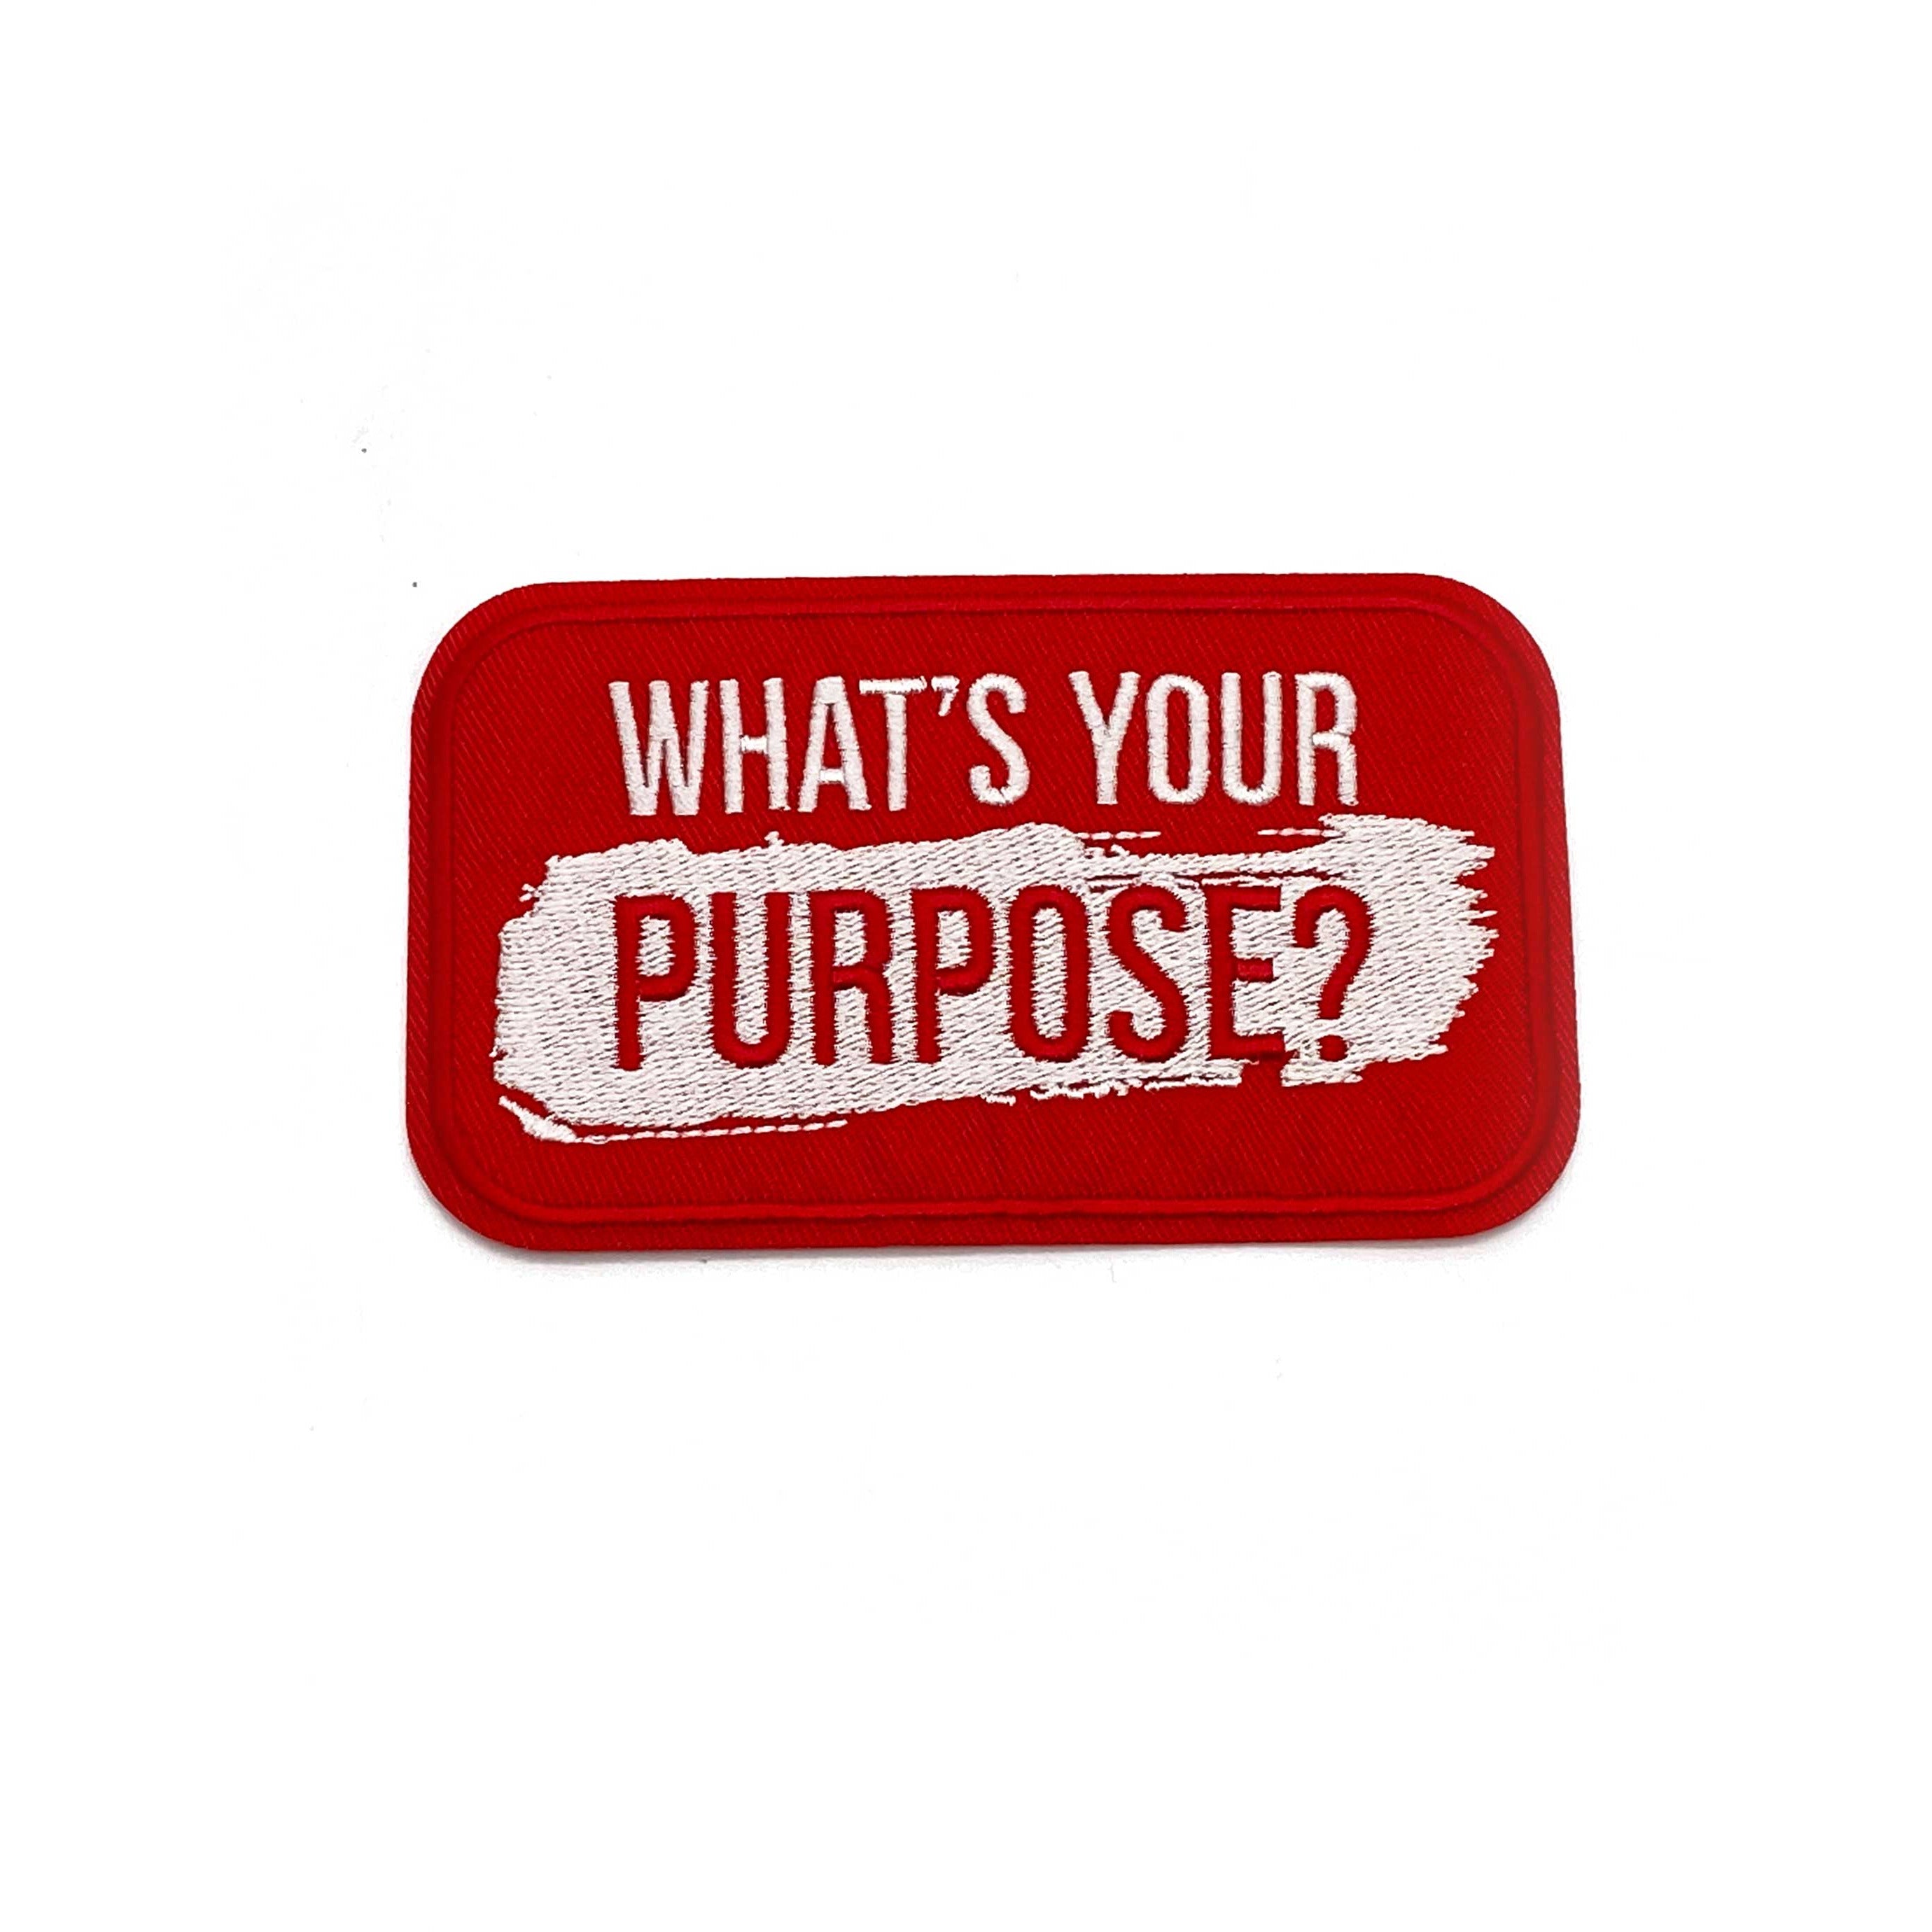 Iron-on Patch: WHAT'S YOUR PURPOSE?